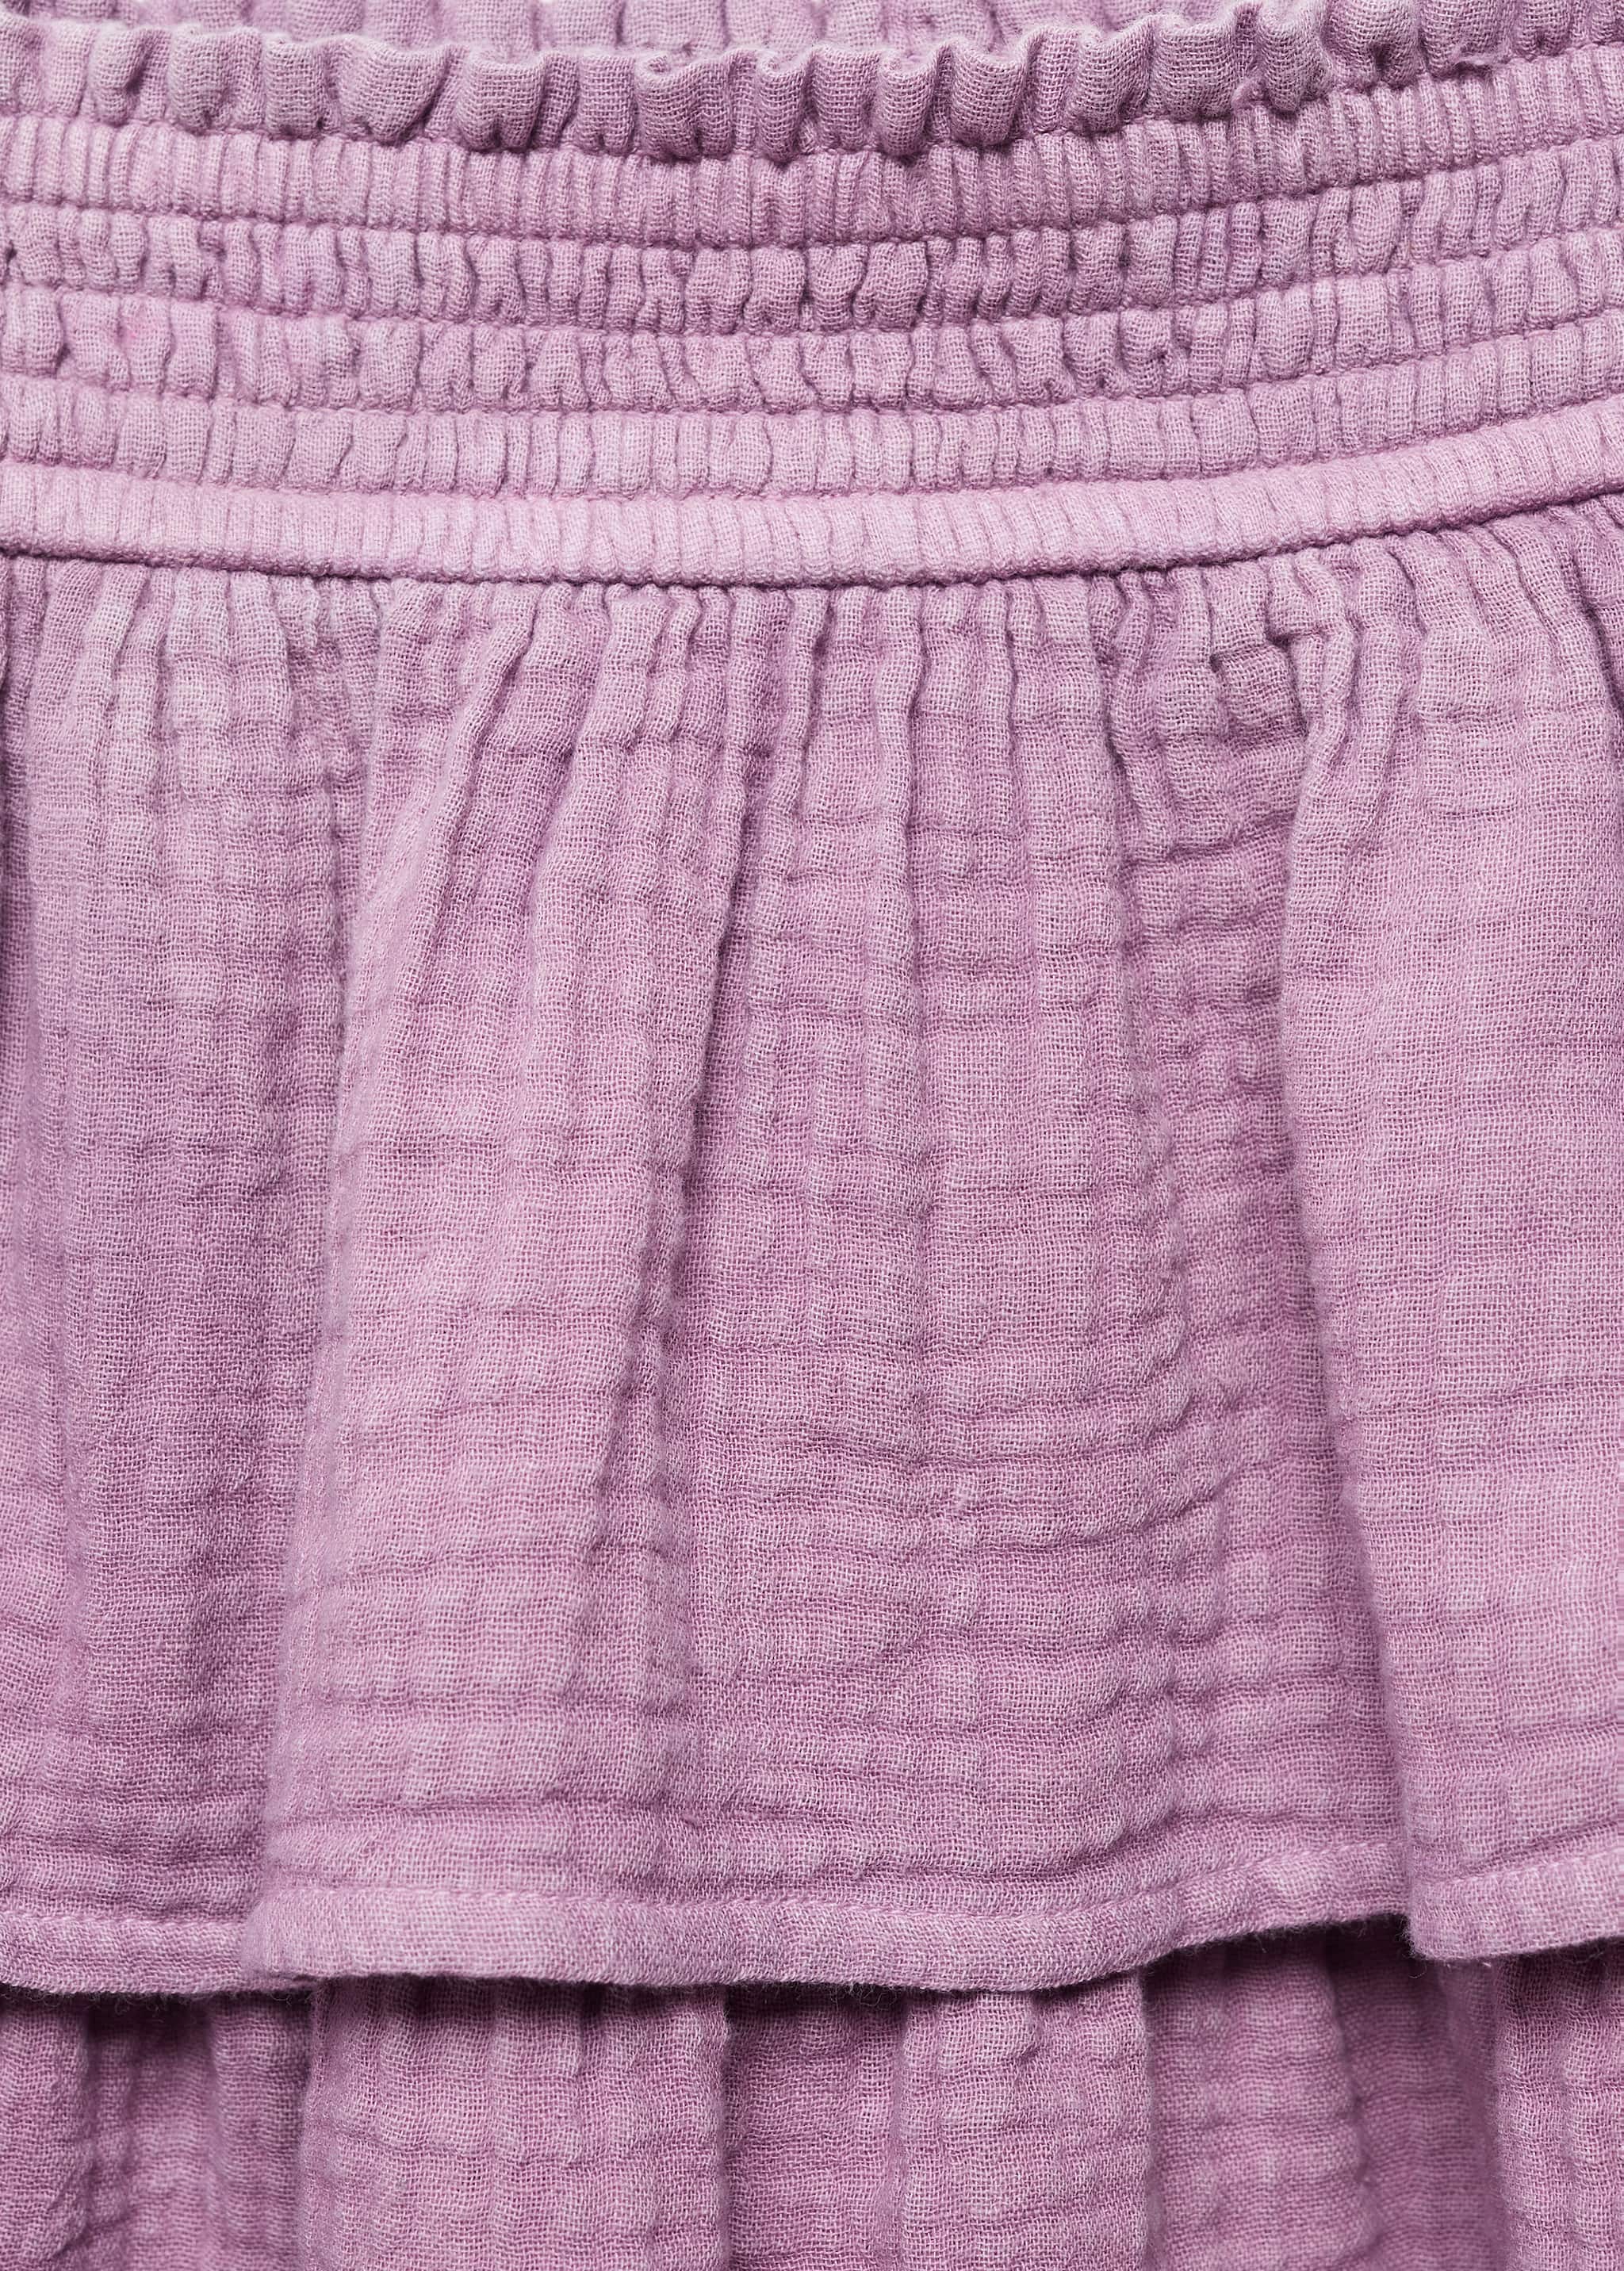 Ruffled skirt - Details of the article 8